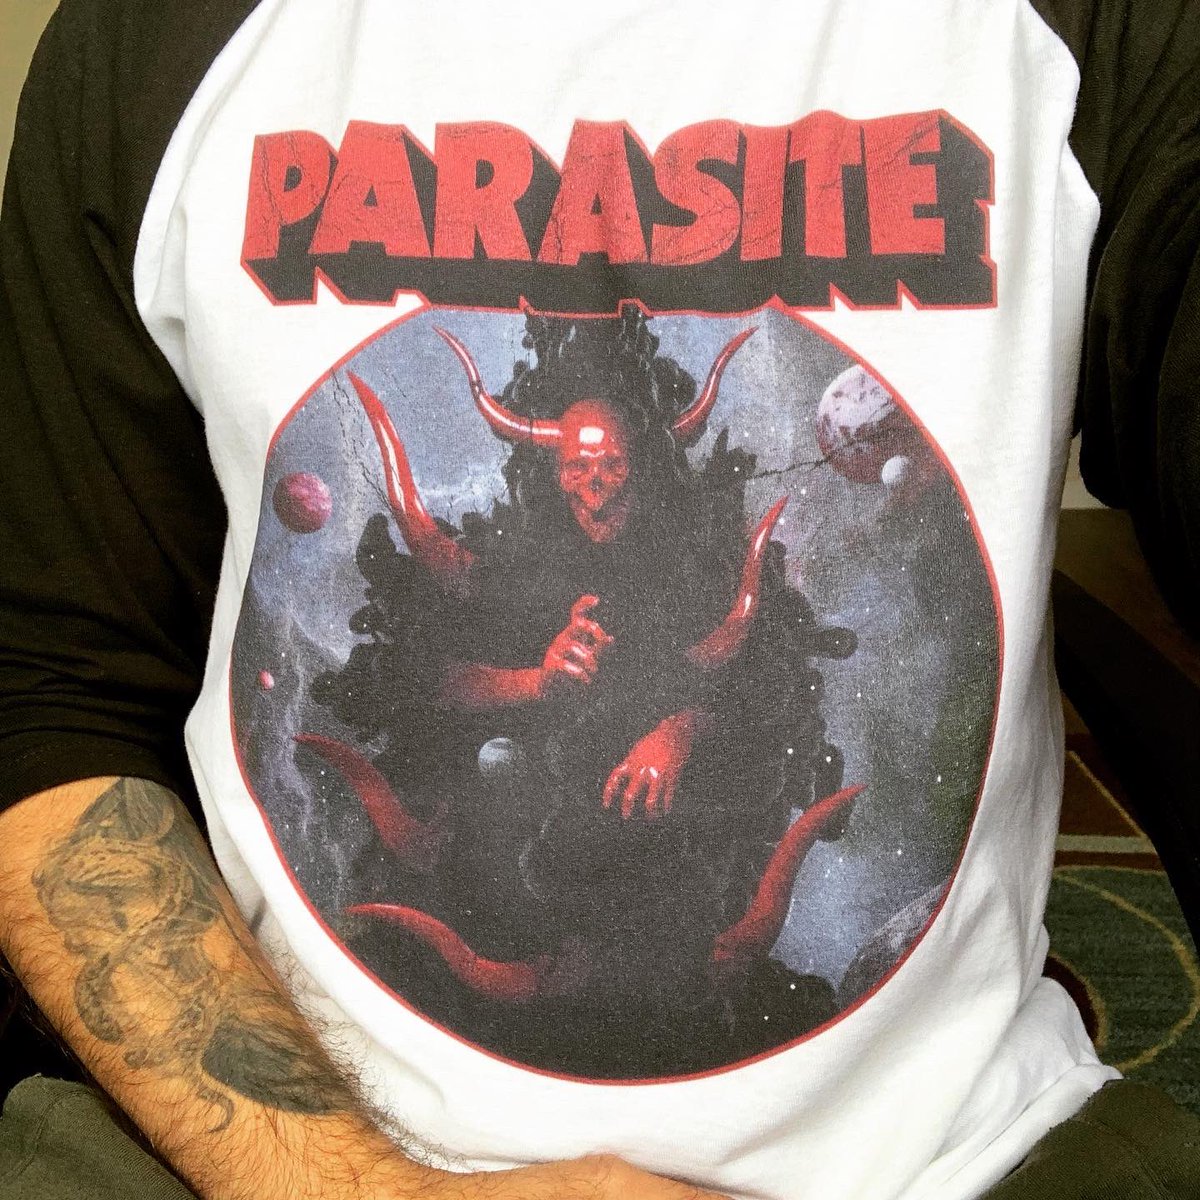 Got another sample, pretty pleased! What do you guys think? I really need to decide and just put these out there but I’m extremely picky 😂 #art #artwork #apparel #appareldesign #graphicdesign #tshirt #designs #parasite #customart #customdesign #kirenbagchee #kirenindigital